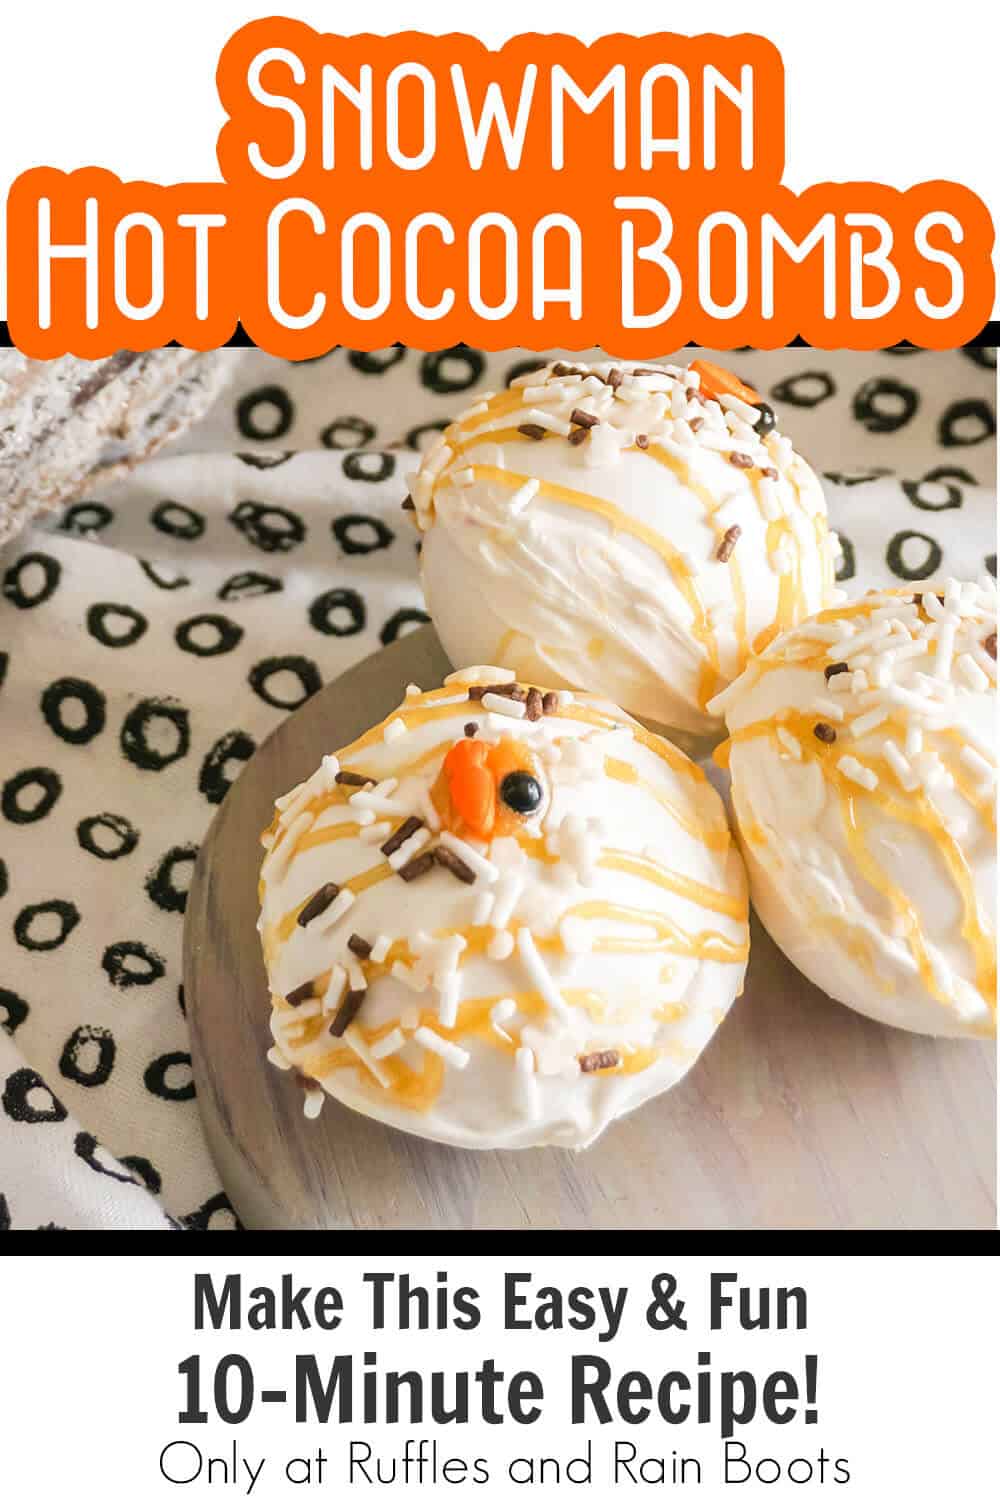 snowman hot chocolate bomb recipe with text which reads snowman hot cocoa bombs make this easy & fun 10-minute recipe!